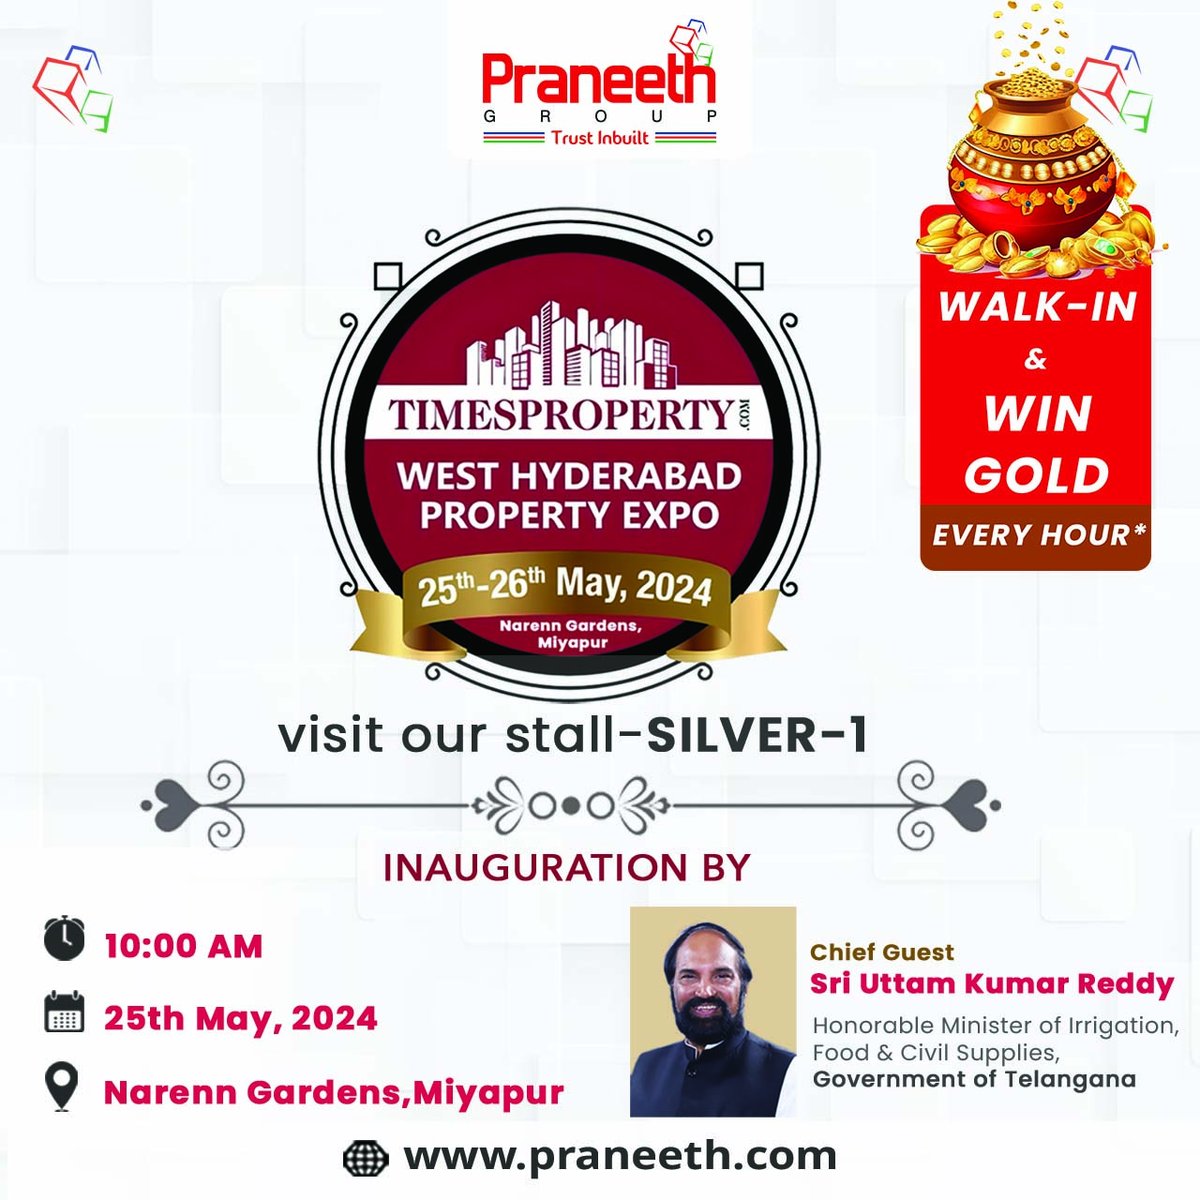 We are participating at the TIMESPROPERTY West Hyderabad Property Expo being held at Narenn Garden, Miyapur on 25th and 26th May, 2024.

Stop by our stall Silver-1 and get all the latest updates on our recent projects!
.
.
.
#PropertyShow2024 #PraneethGroup #Timesproperty